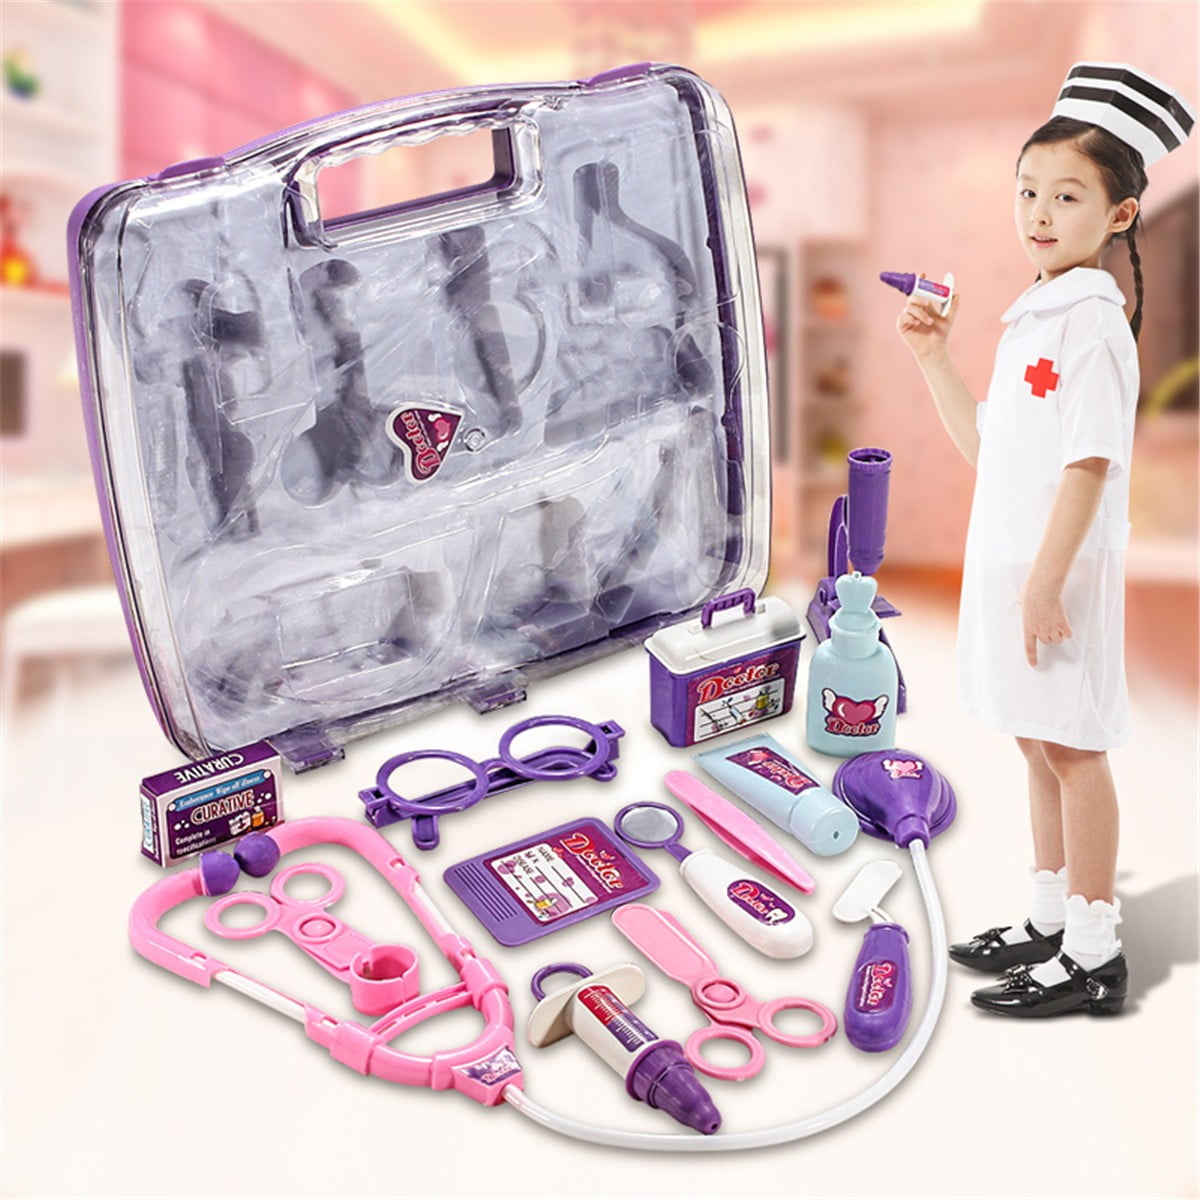 Kids Child Doctor Nurse Medical Play Toys Kit Set Pretend Educational Role Play 